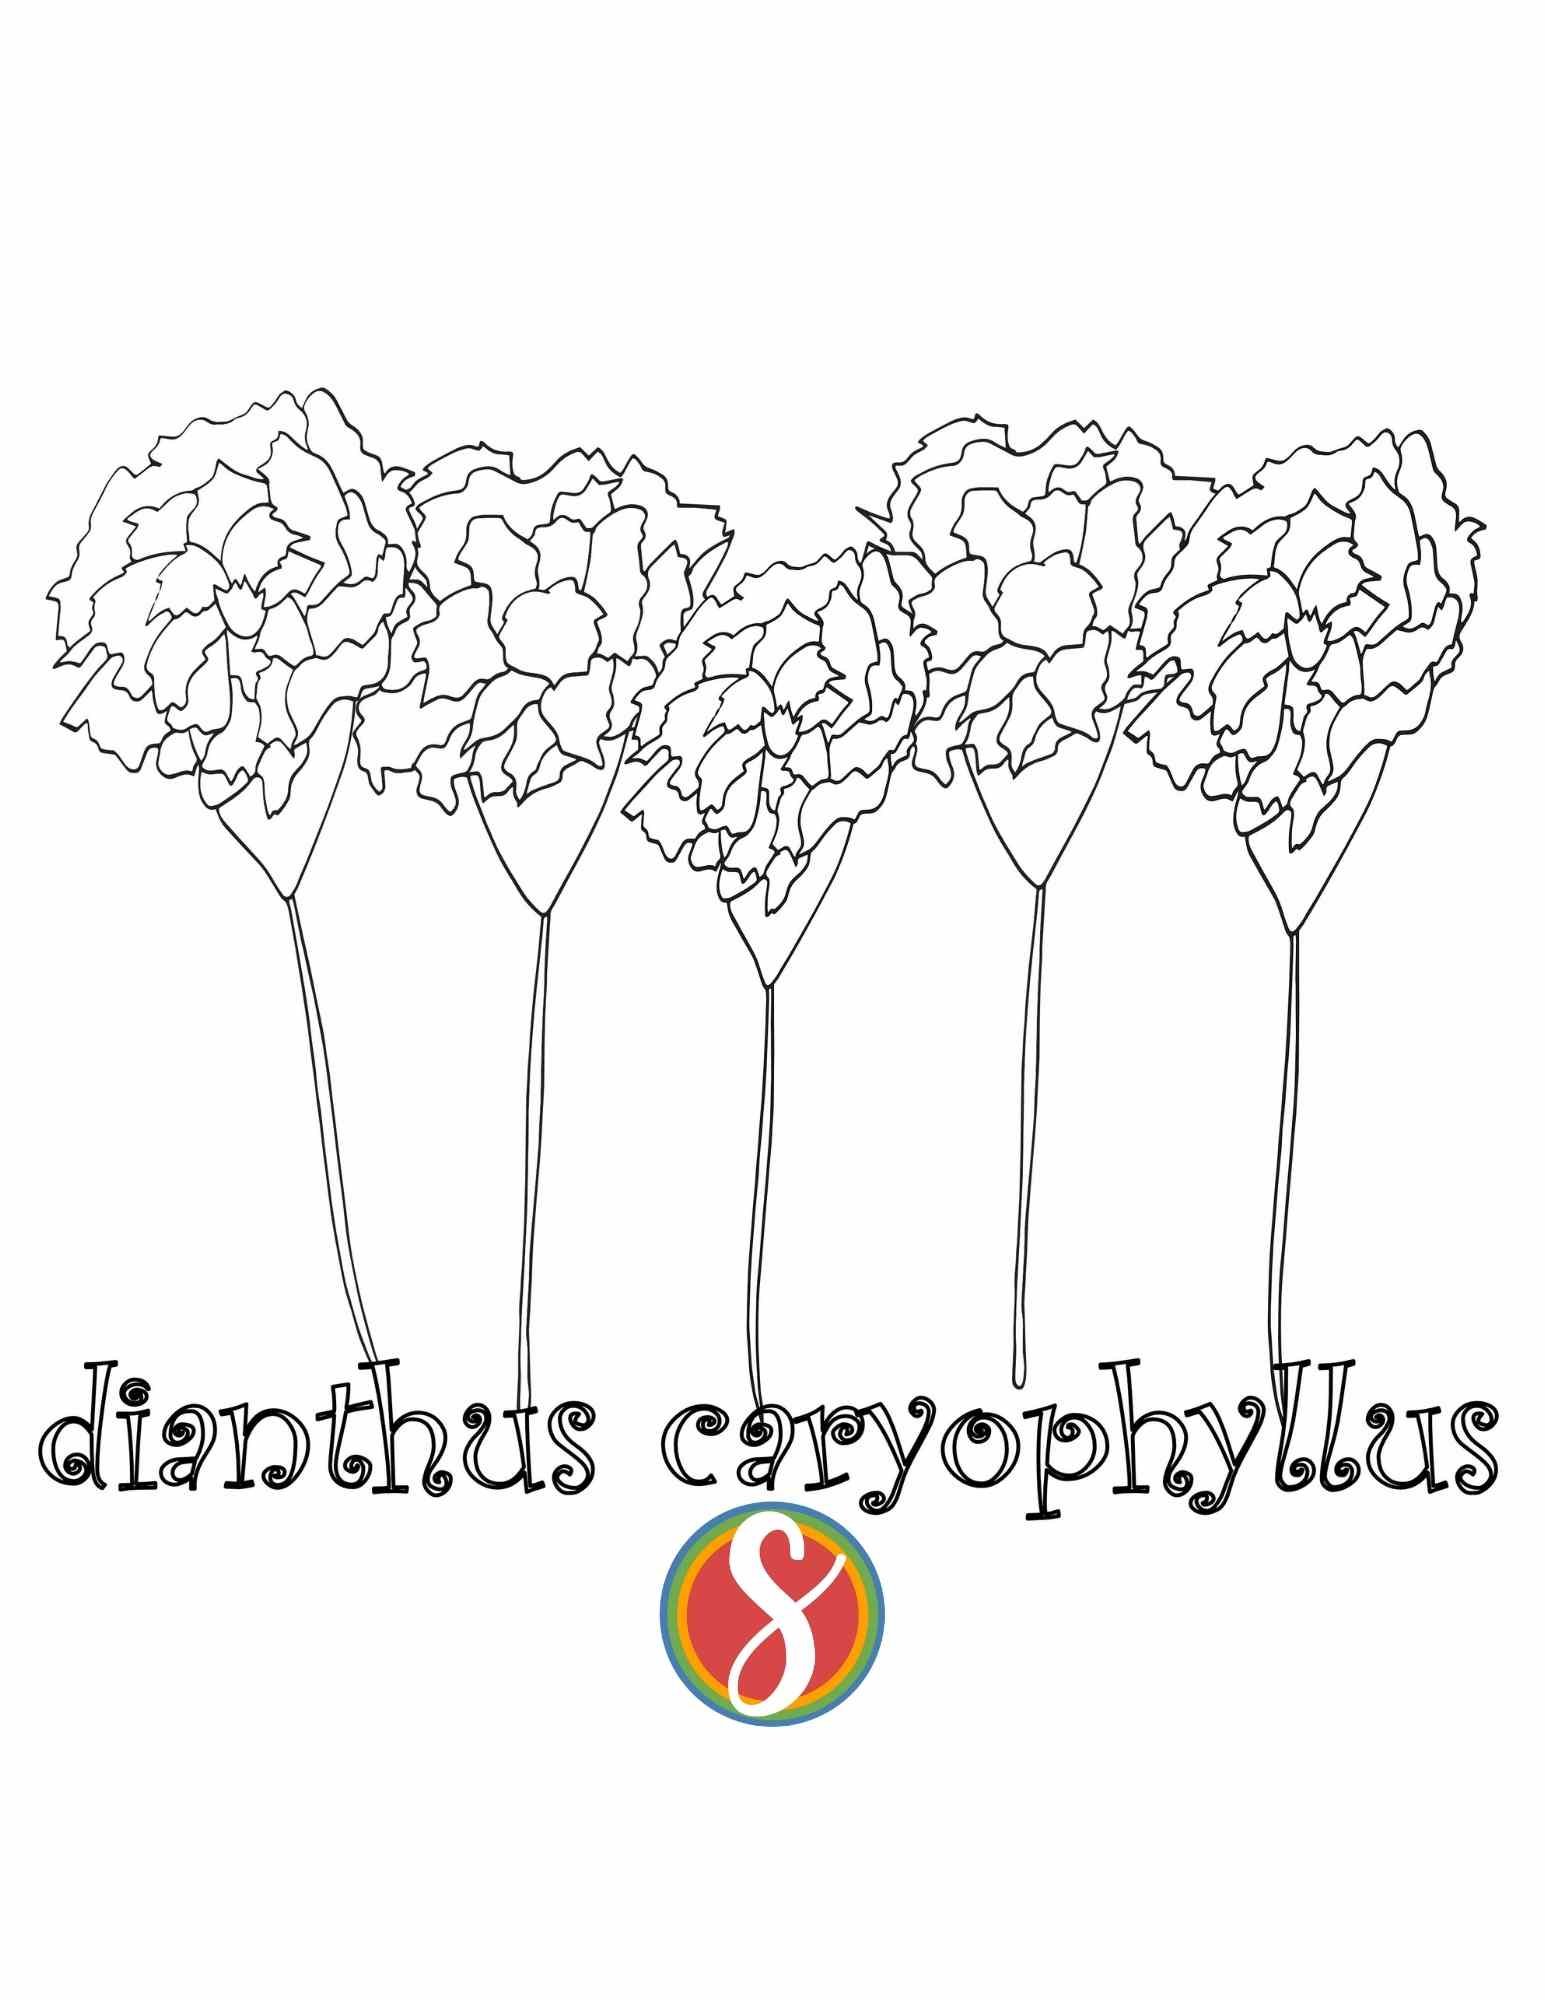 5 carnations with stems, lined up horizontally on a carnation coloring page